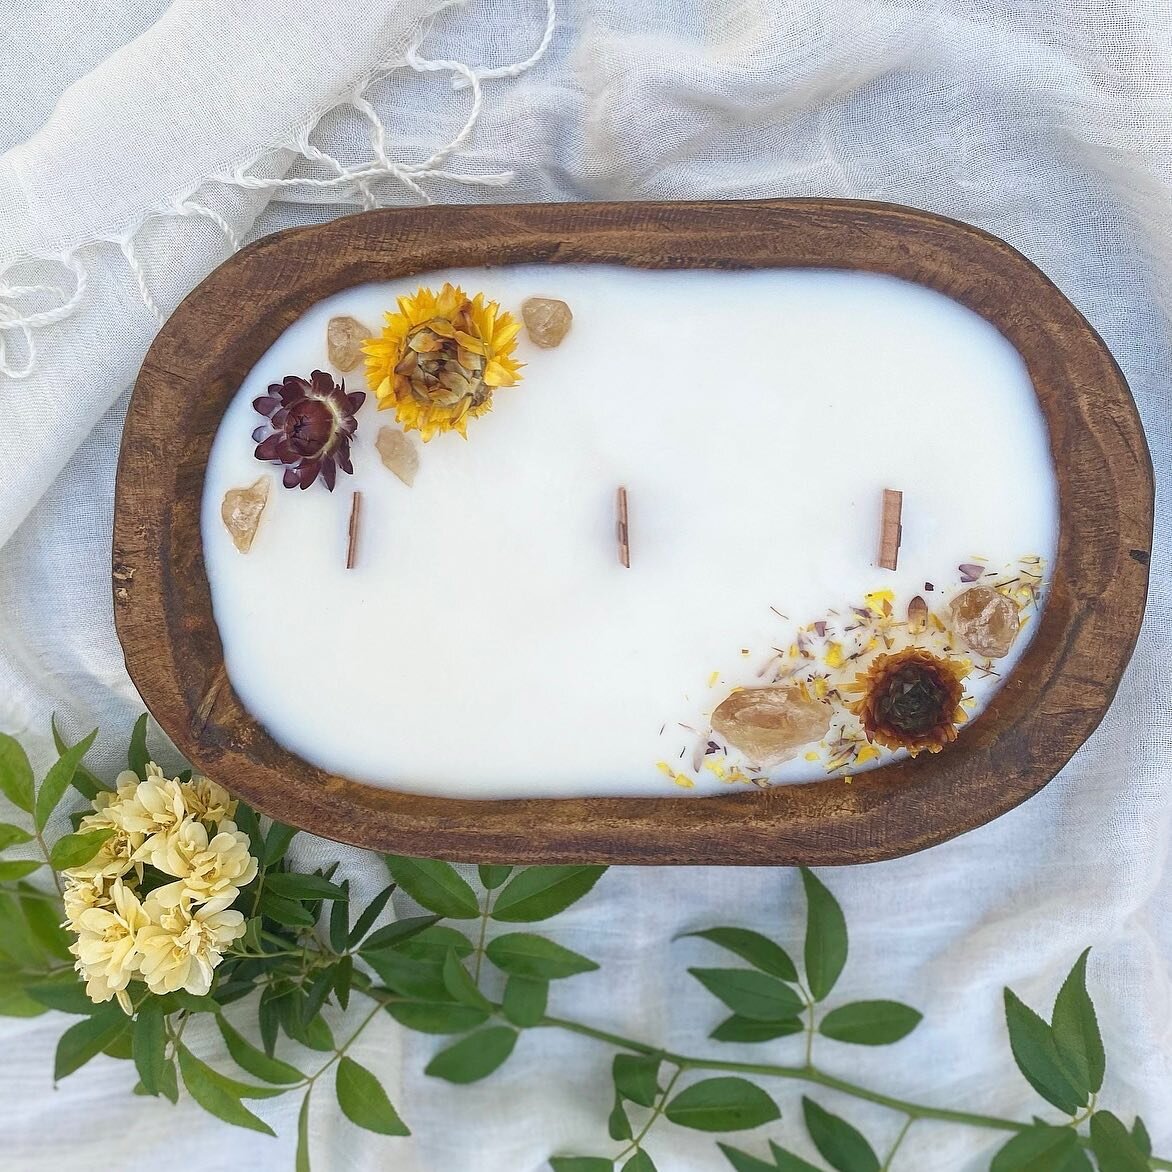 Order our beautiful dough bowl candle on our new website! 🌼 
https://www.earthglo.co/
&bull;
&bull;
&bull;
&bull;
&bull;
&bull;
#earthglo #candle #doughbowlcandles #spring #flowers #crystals #nontoxic #organic #vegan #soywaxcandles #essentialoils #w